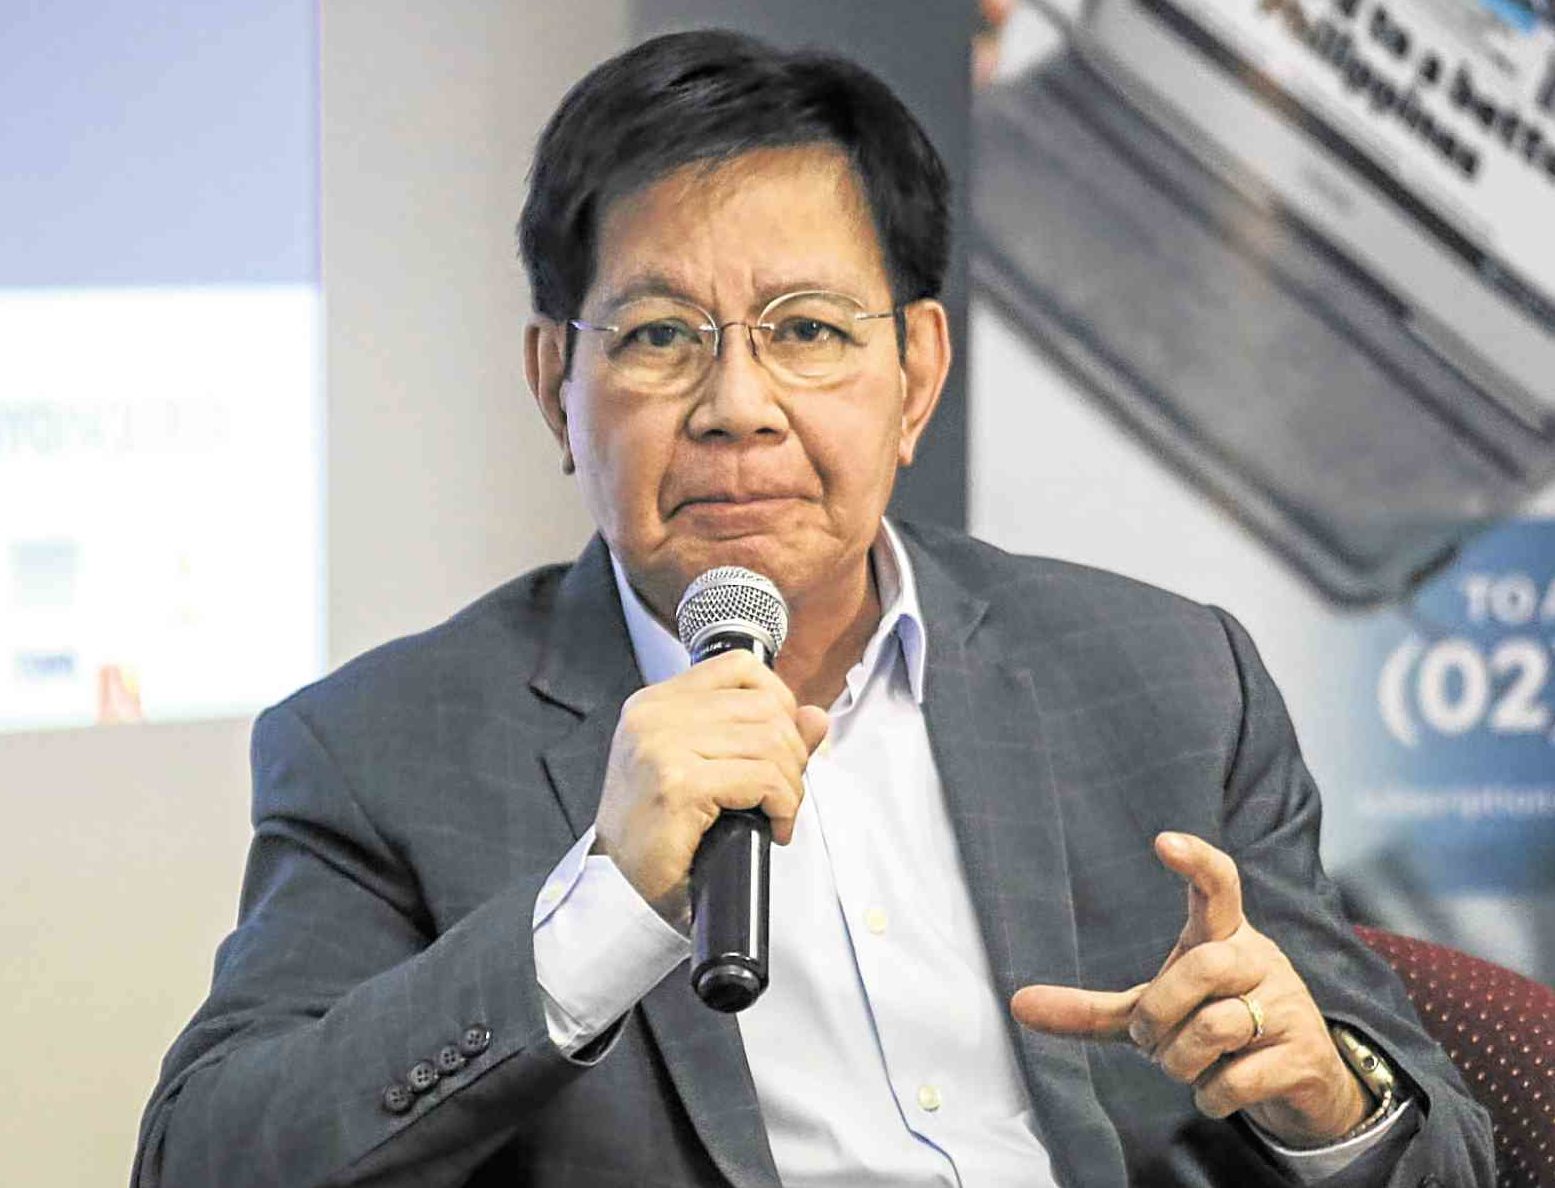 After recent bombings, Lacson urges AFP to intensify intel operations